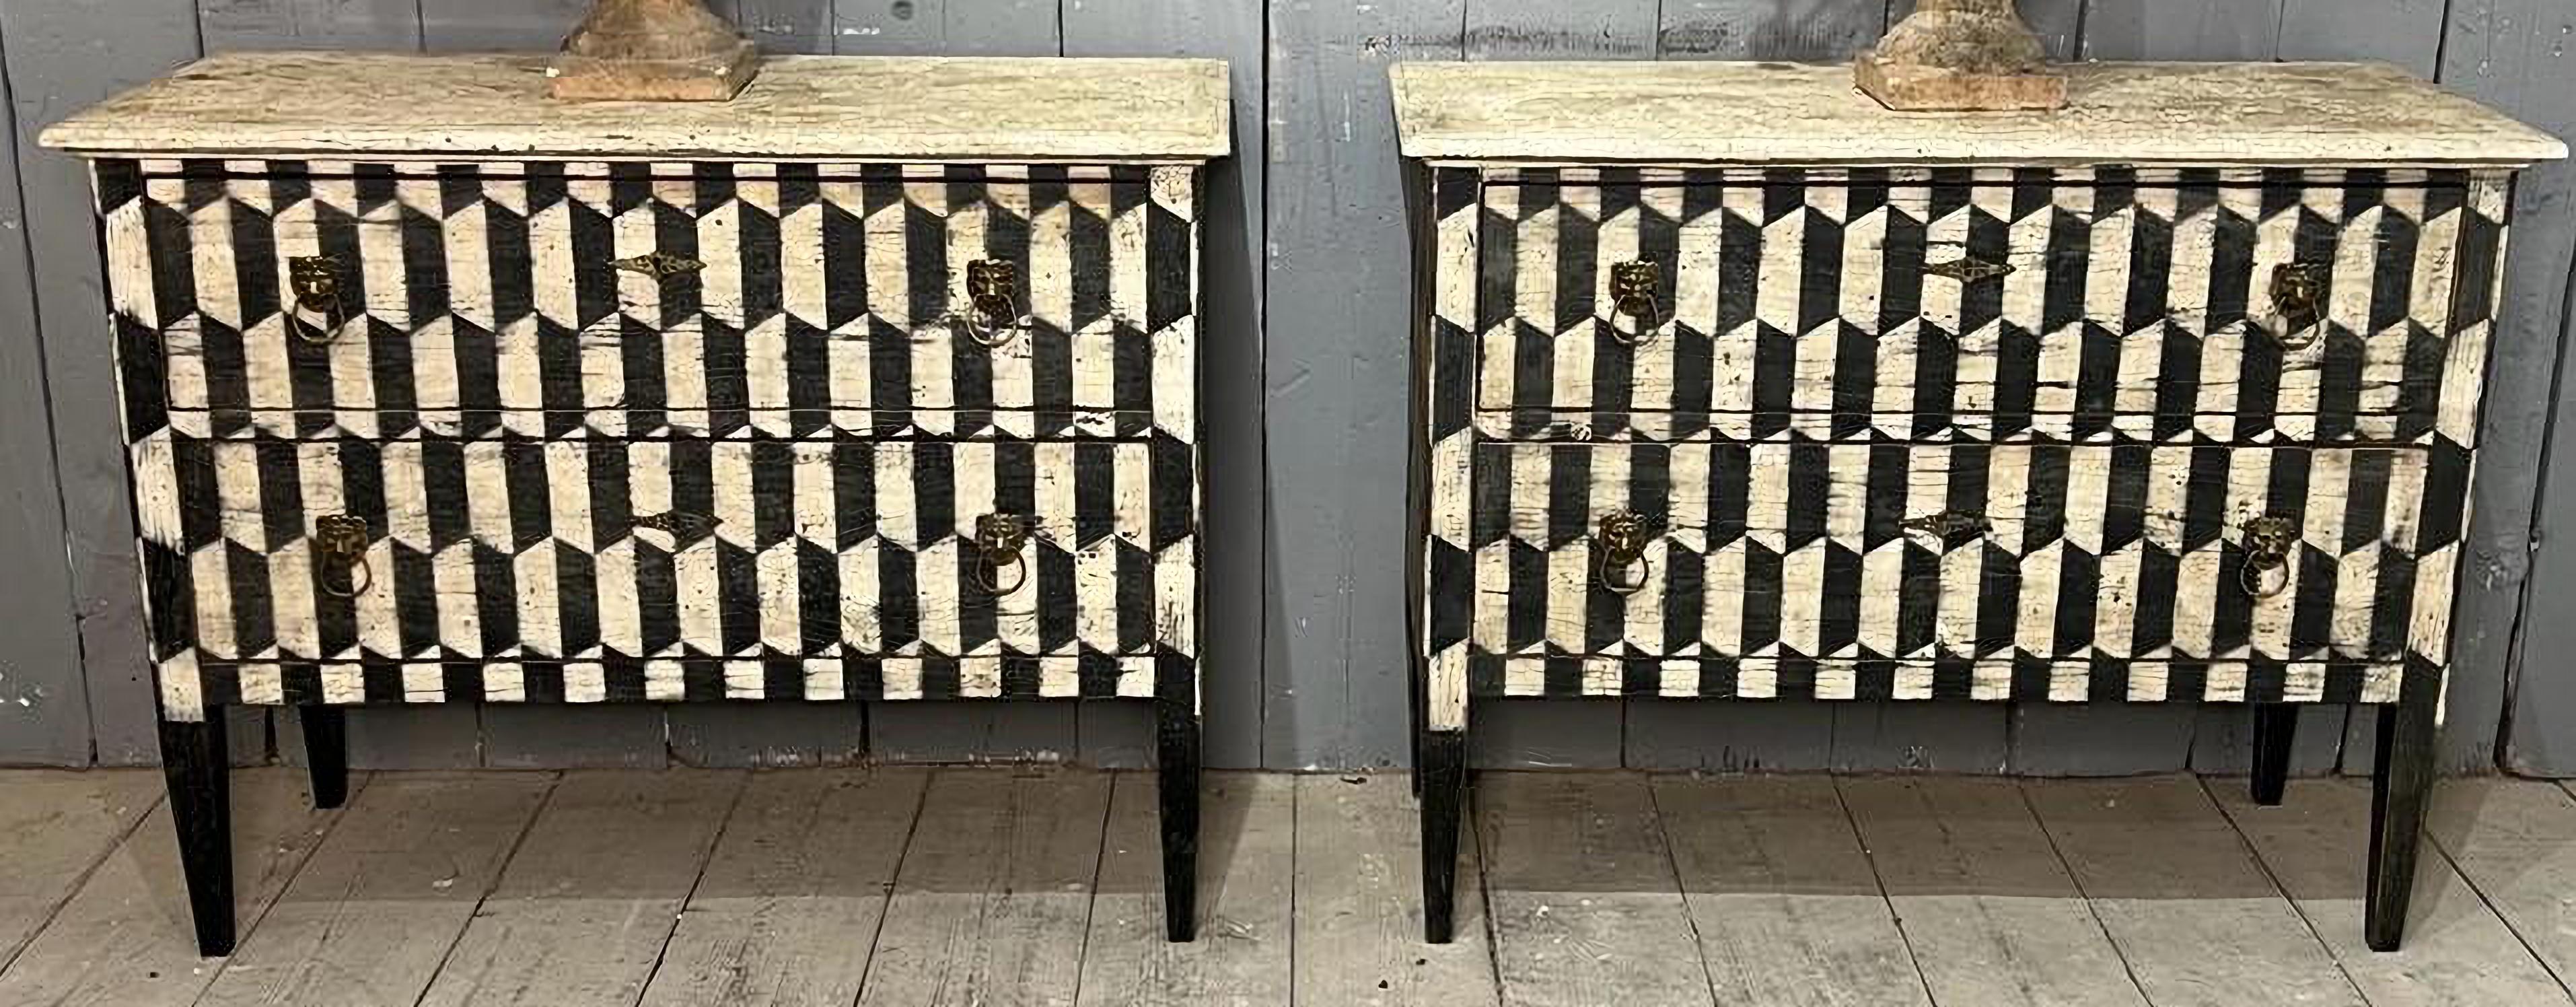 Beautiful Pair of Italian Chests of Drawers early 20th Century
Pine wood
perfectly preserved
Measurements with the upper floor:
109cm x 47cm x 2.5cm
Measurements without the upstairs:
105cm x 47cm x 90cm